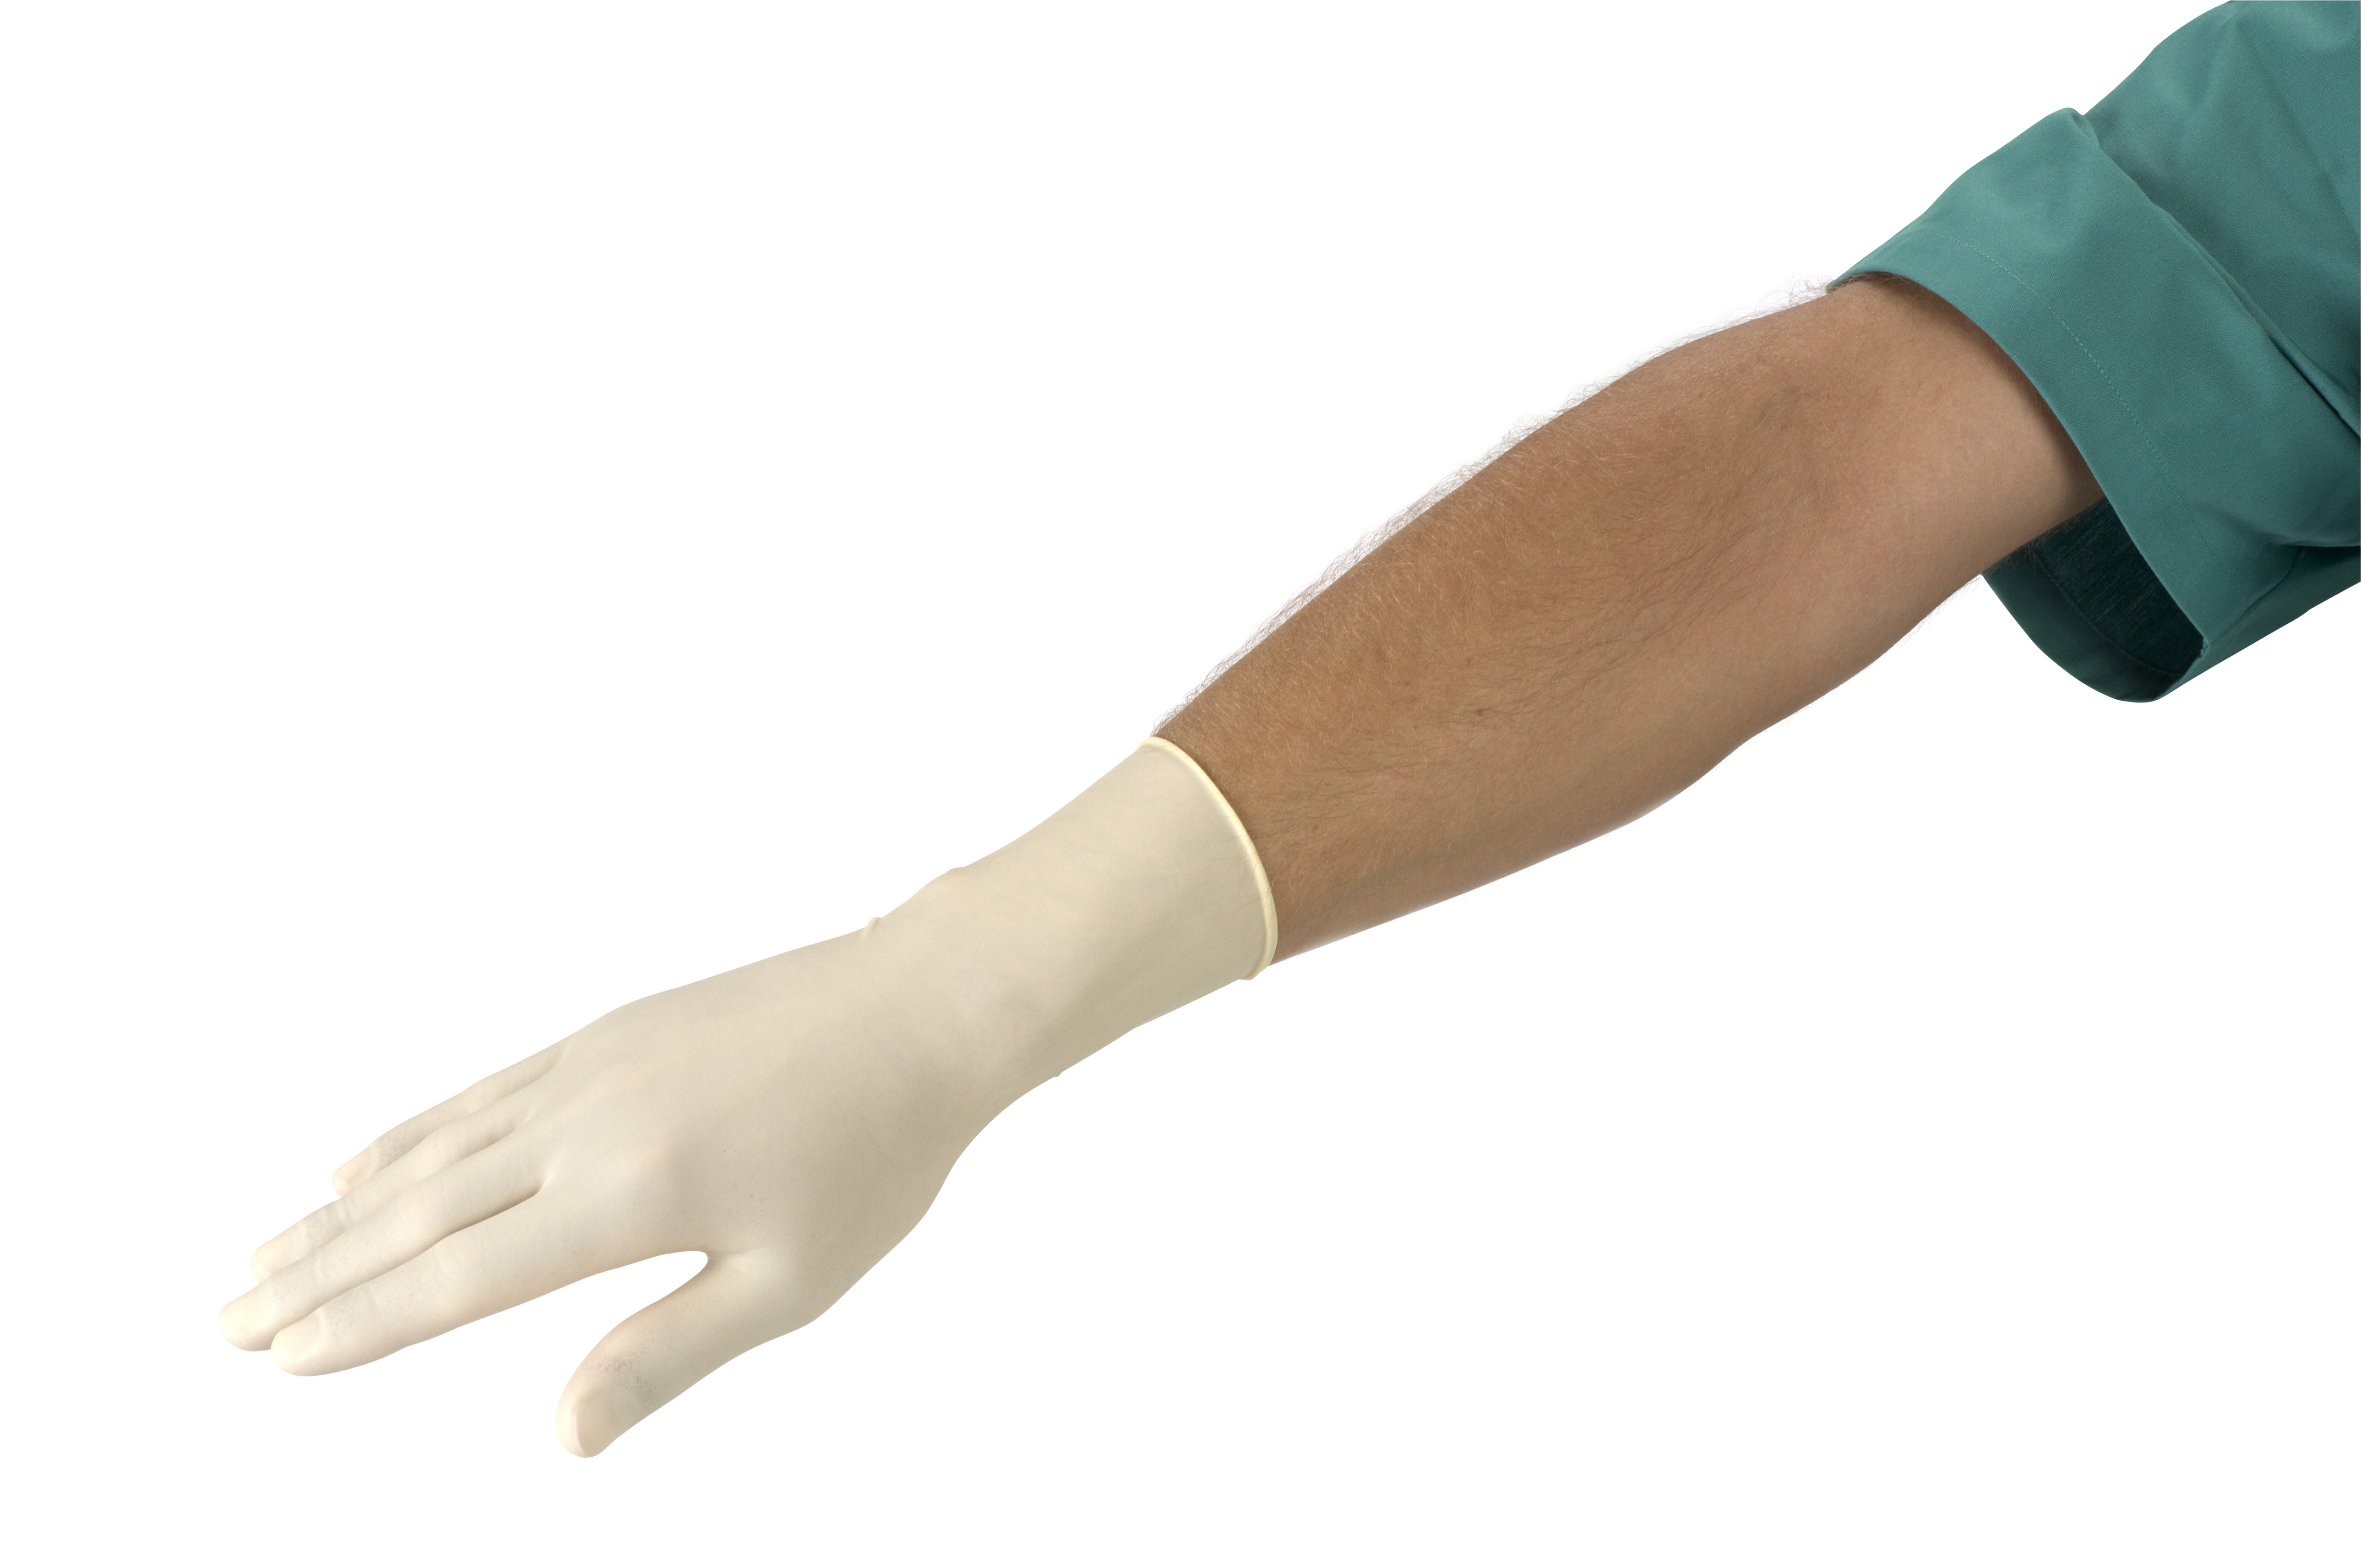 US -KRUTEX surgical gloves PF size 7.0, 50/pk